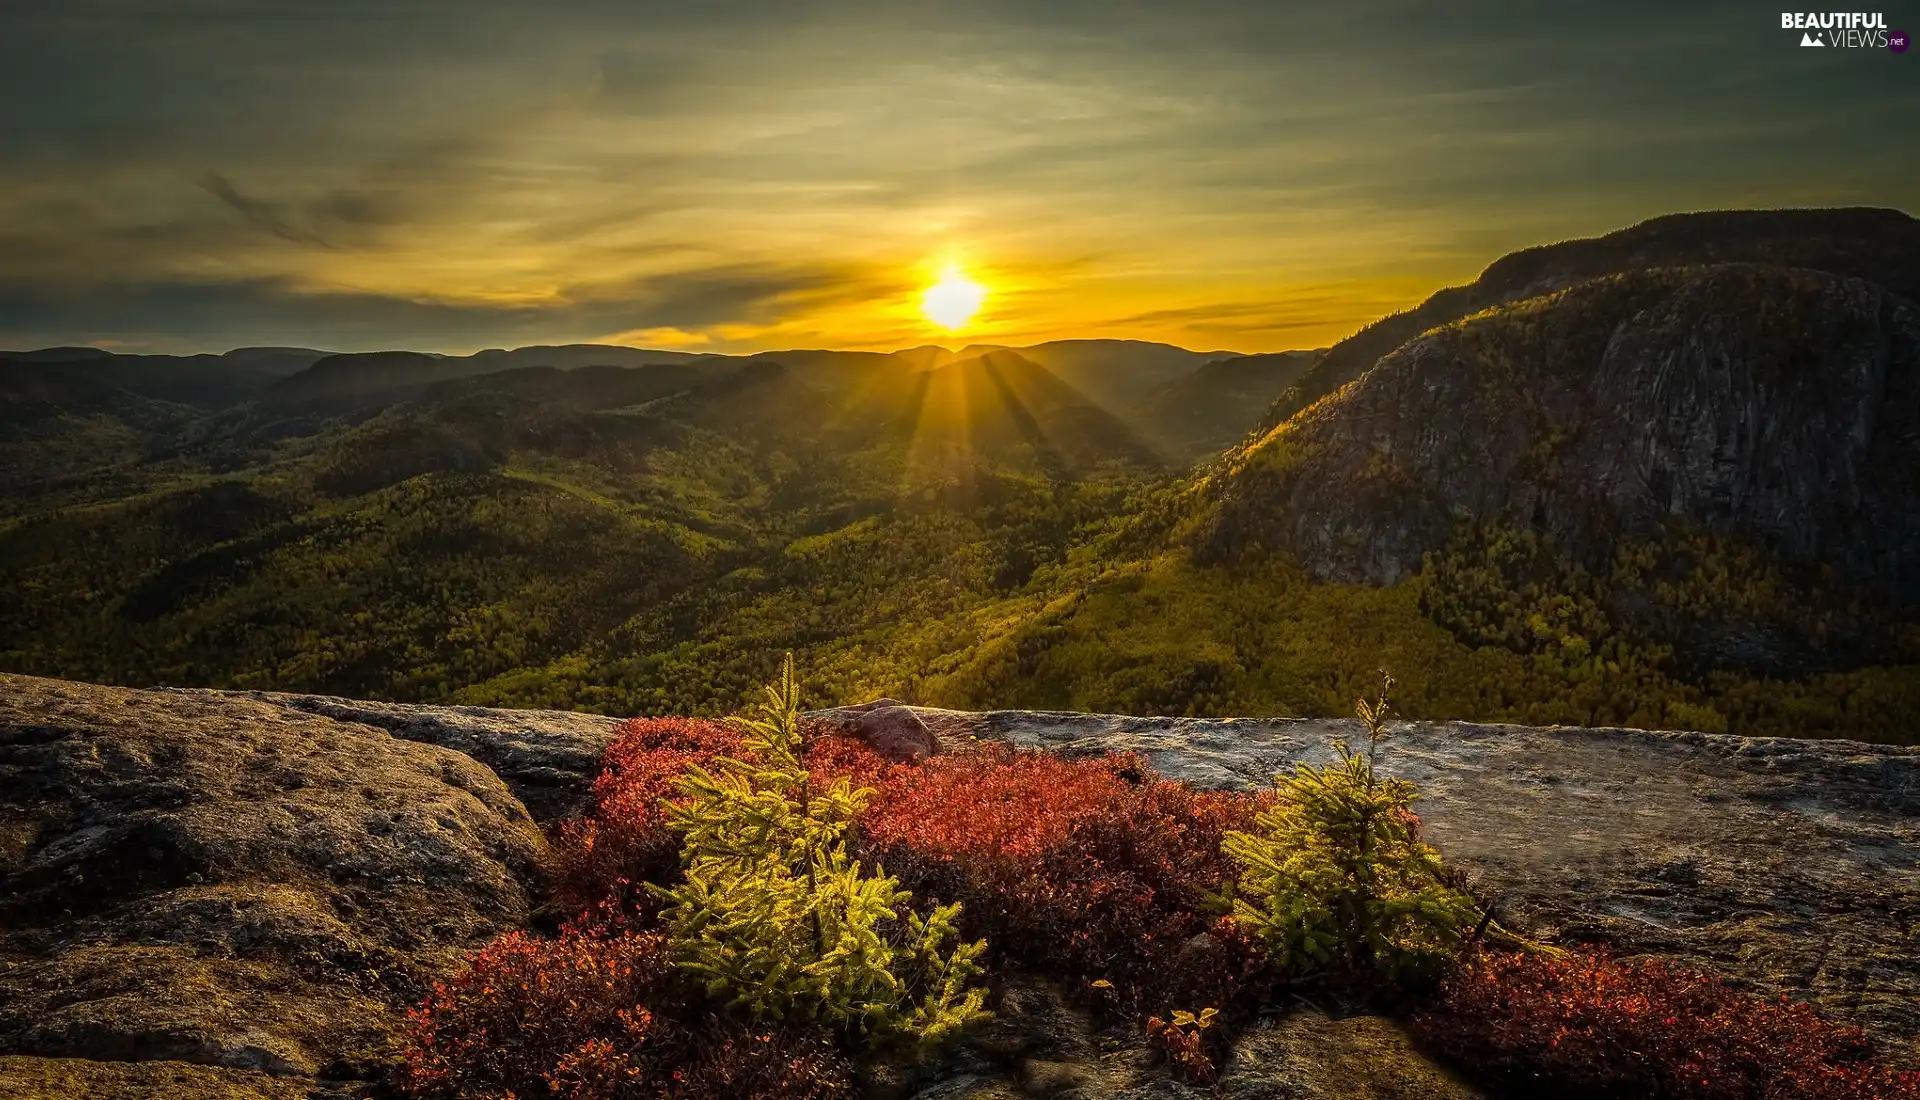 Rocks, Great Sunsets, trees, viewes, VEGETATION, Mountains